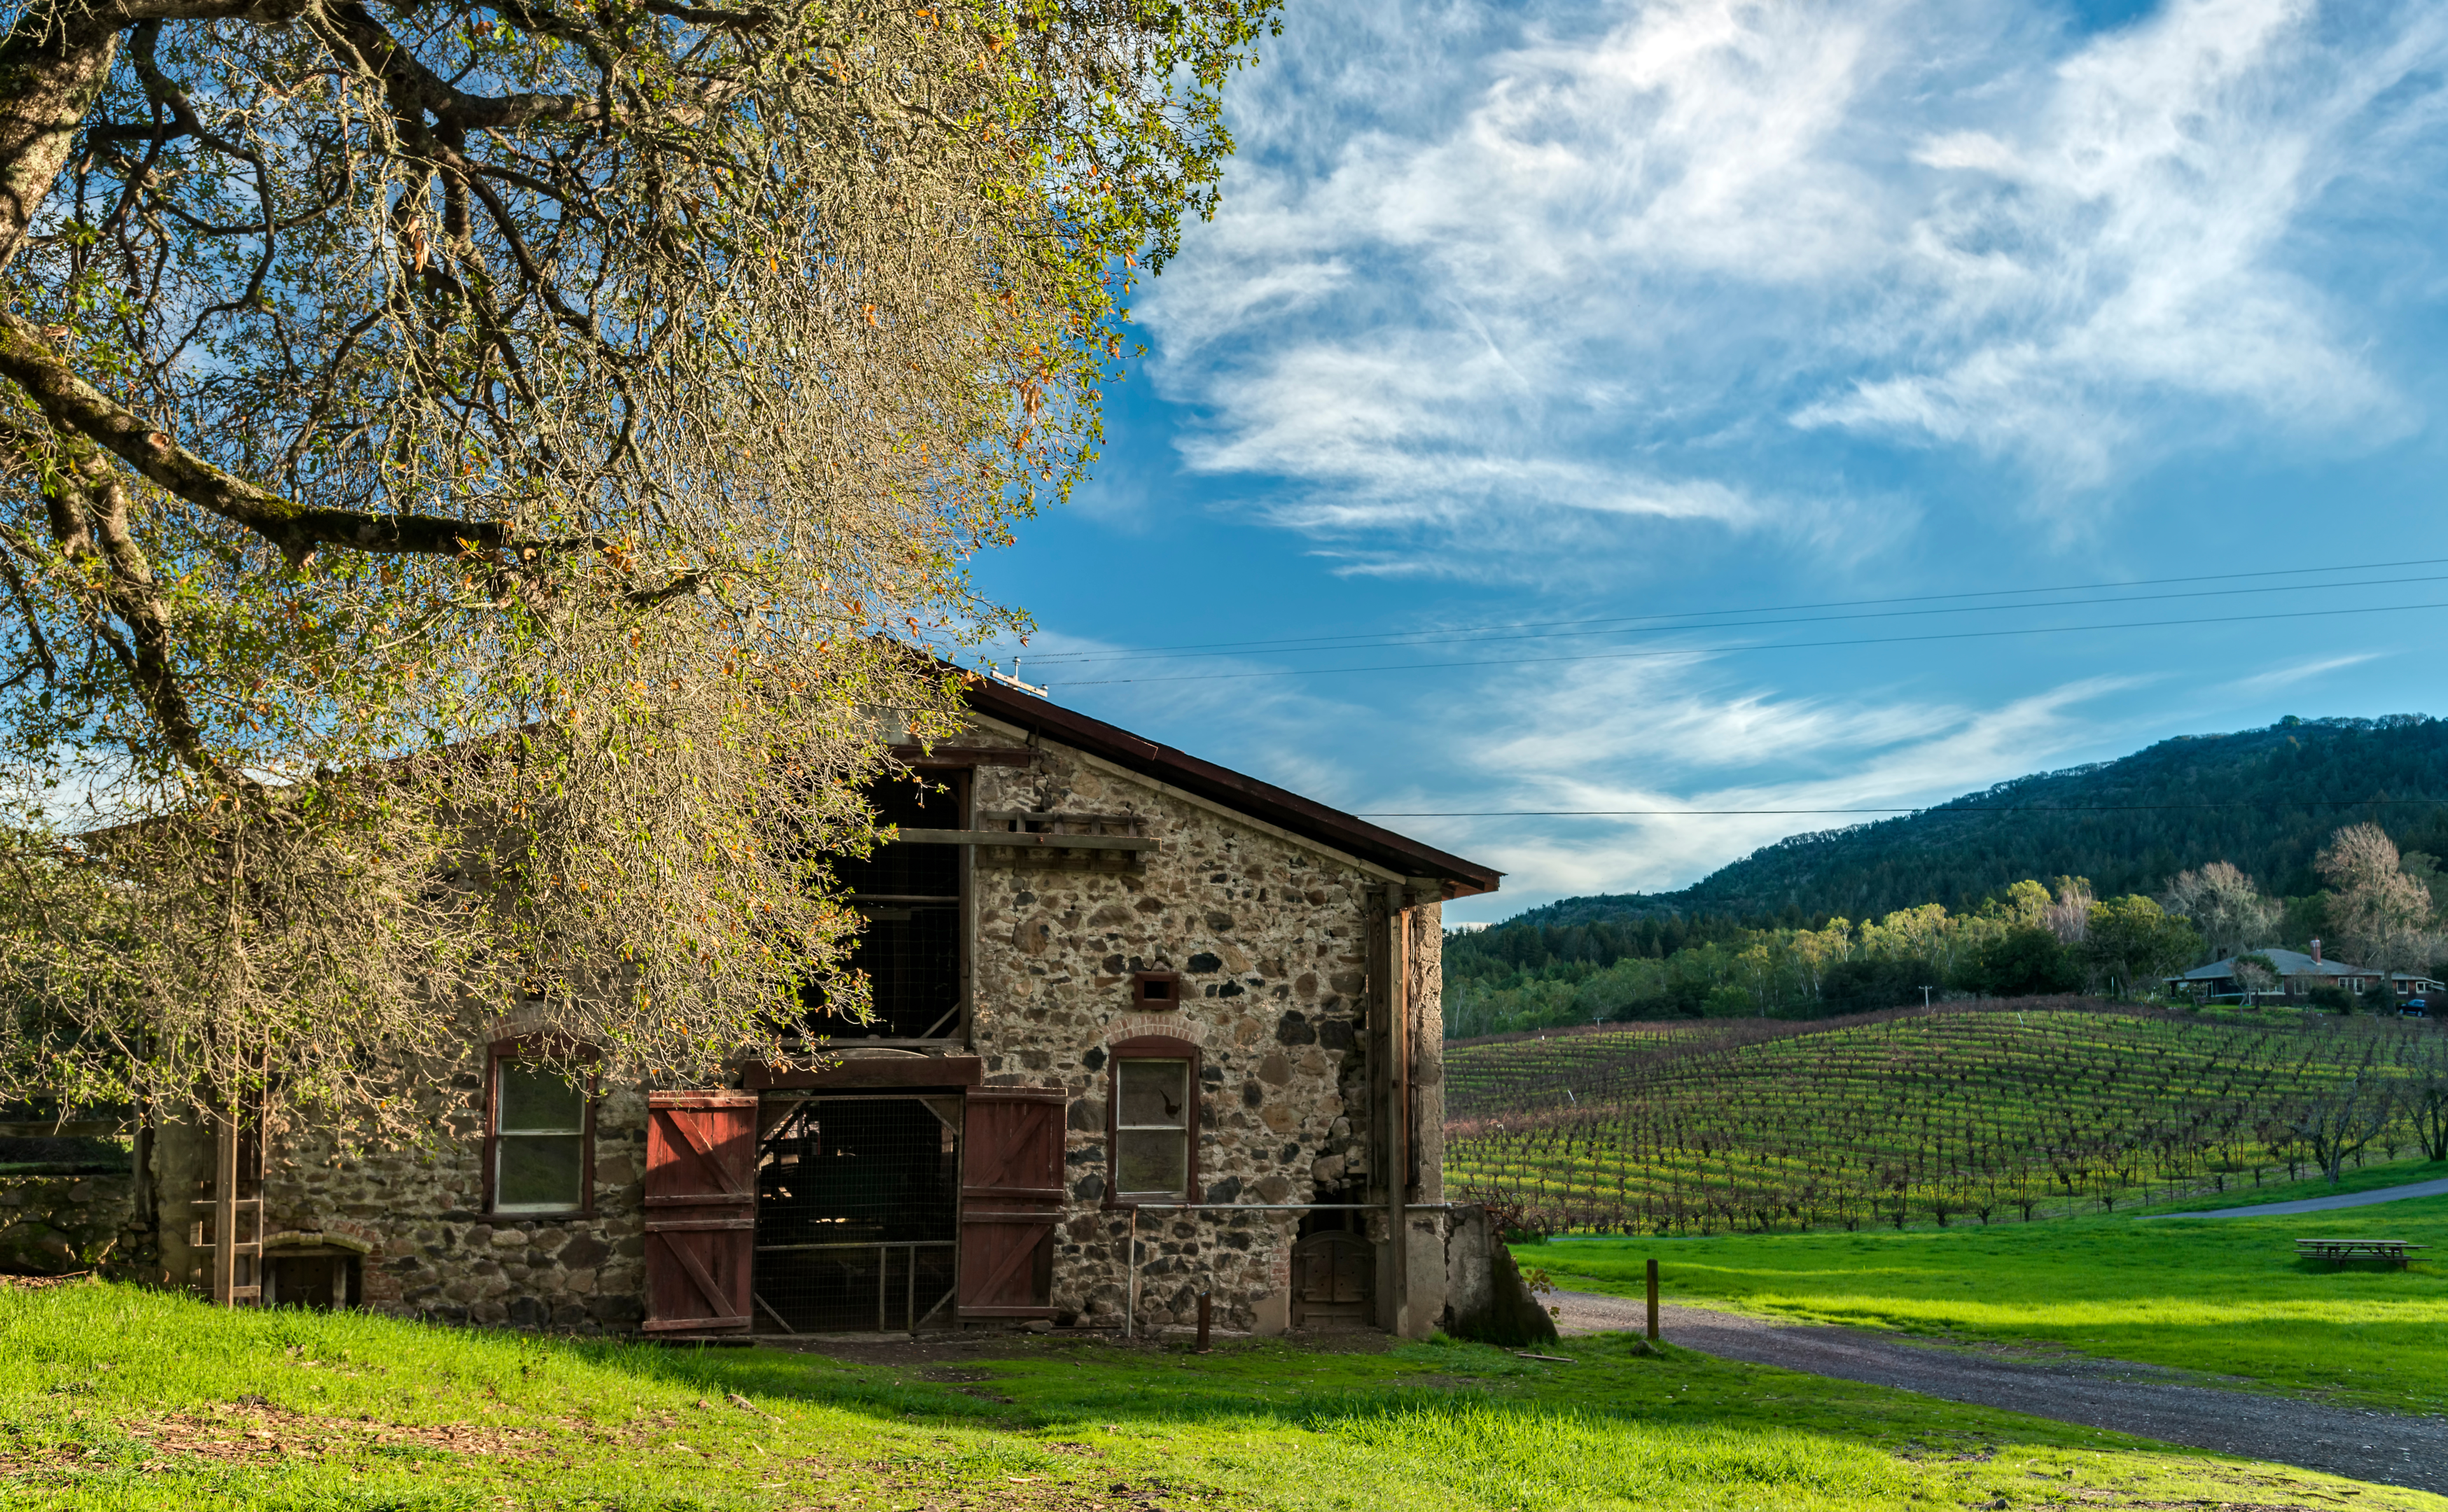 The Historic Barn in Jack London State Park